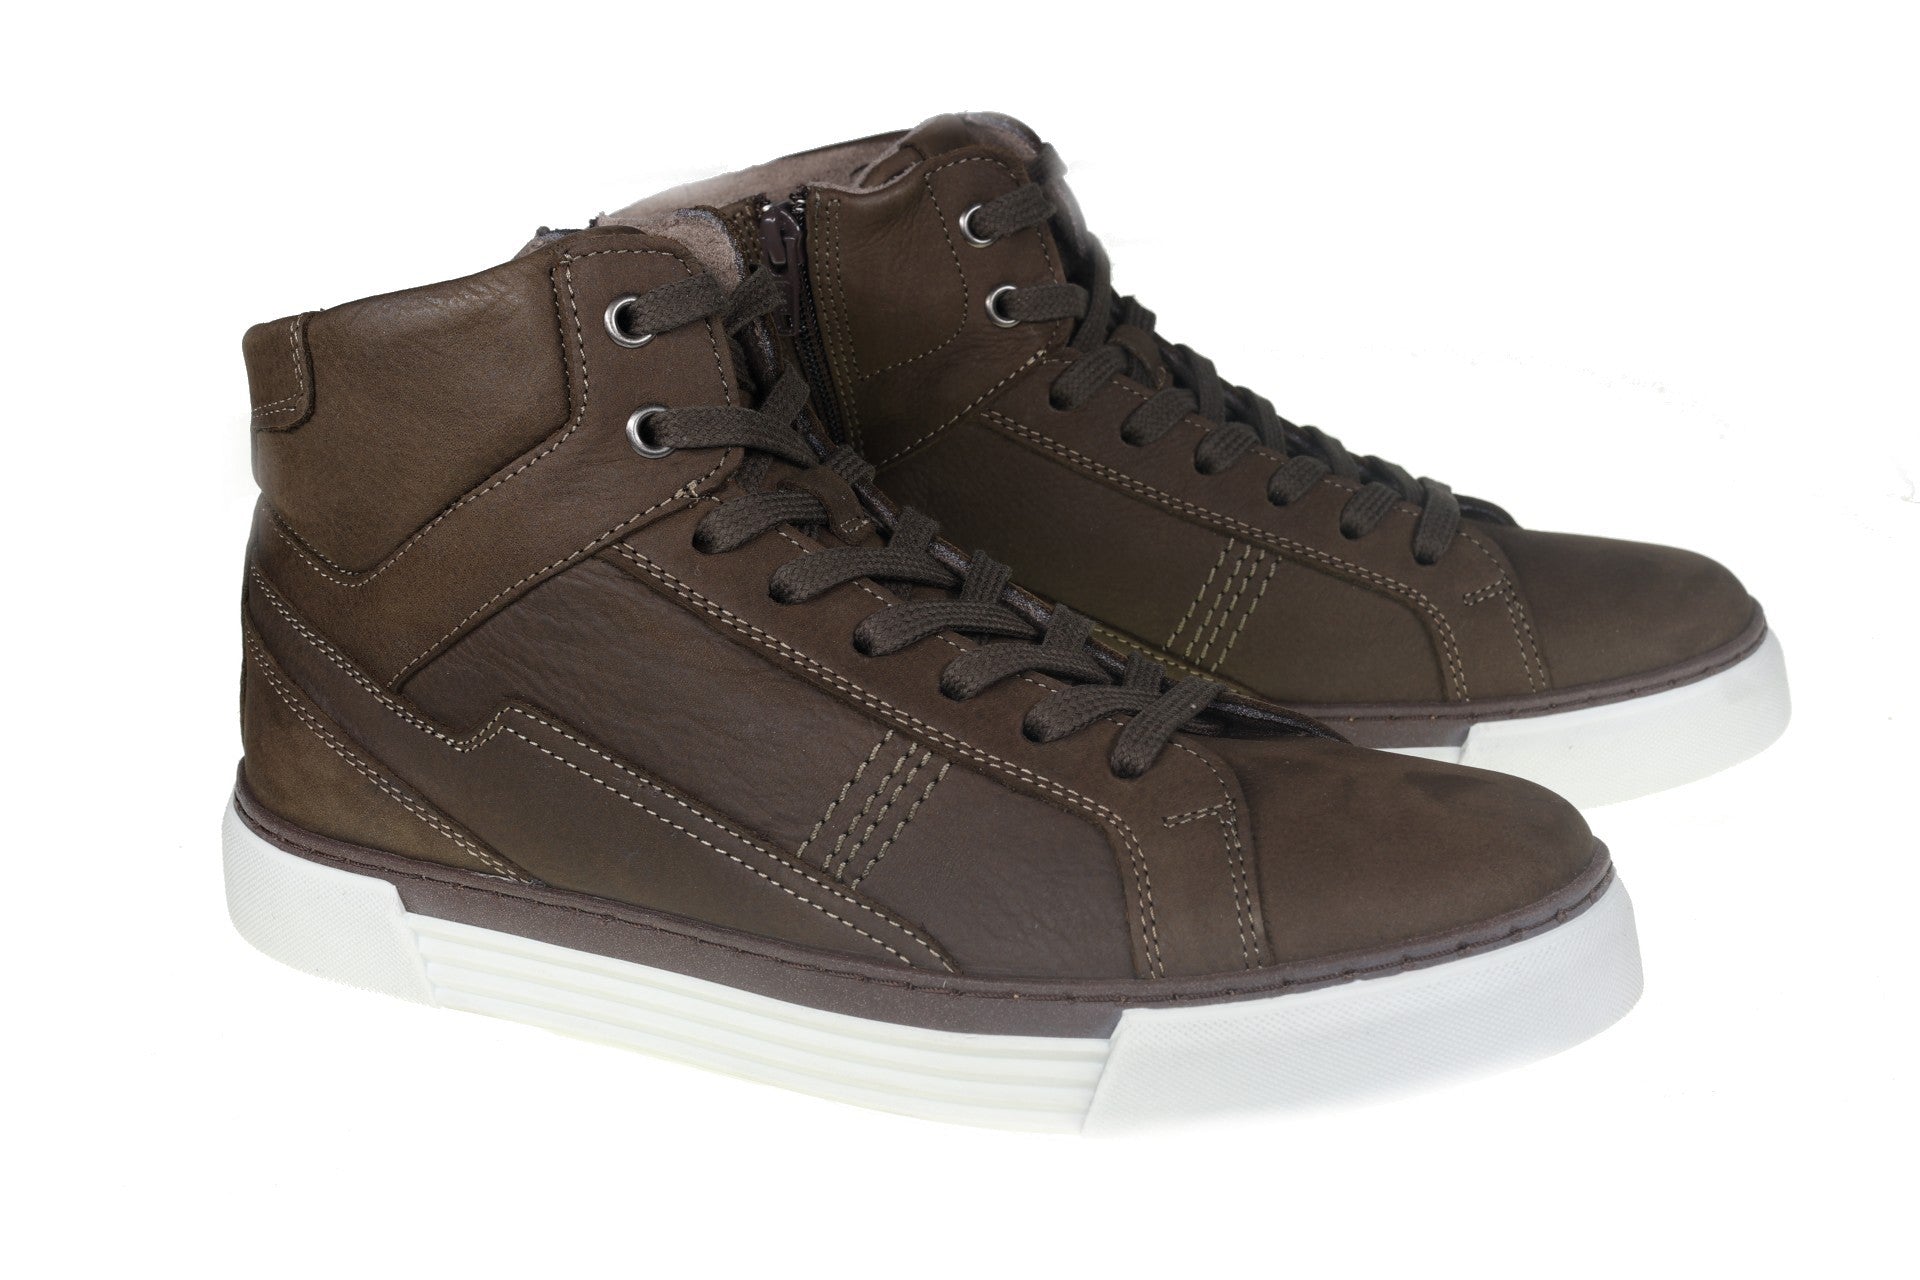 '0460.14.08' men's sneaker boot - Pius by Gabor - Chaplinshoes'0460.14.08' men's sneaker boot - Pius by GaborPius Gabor